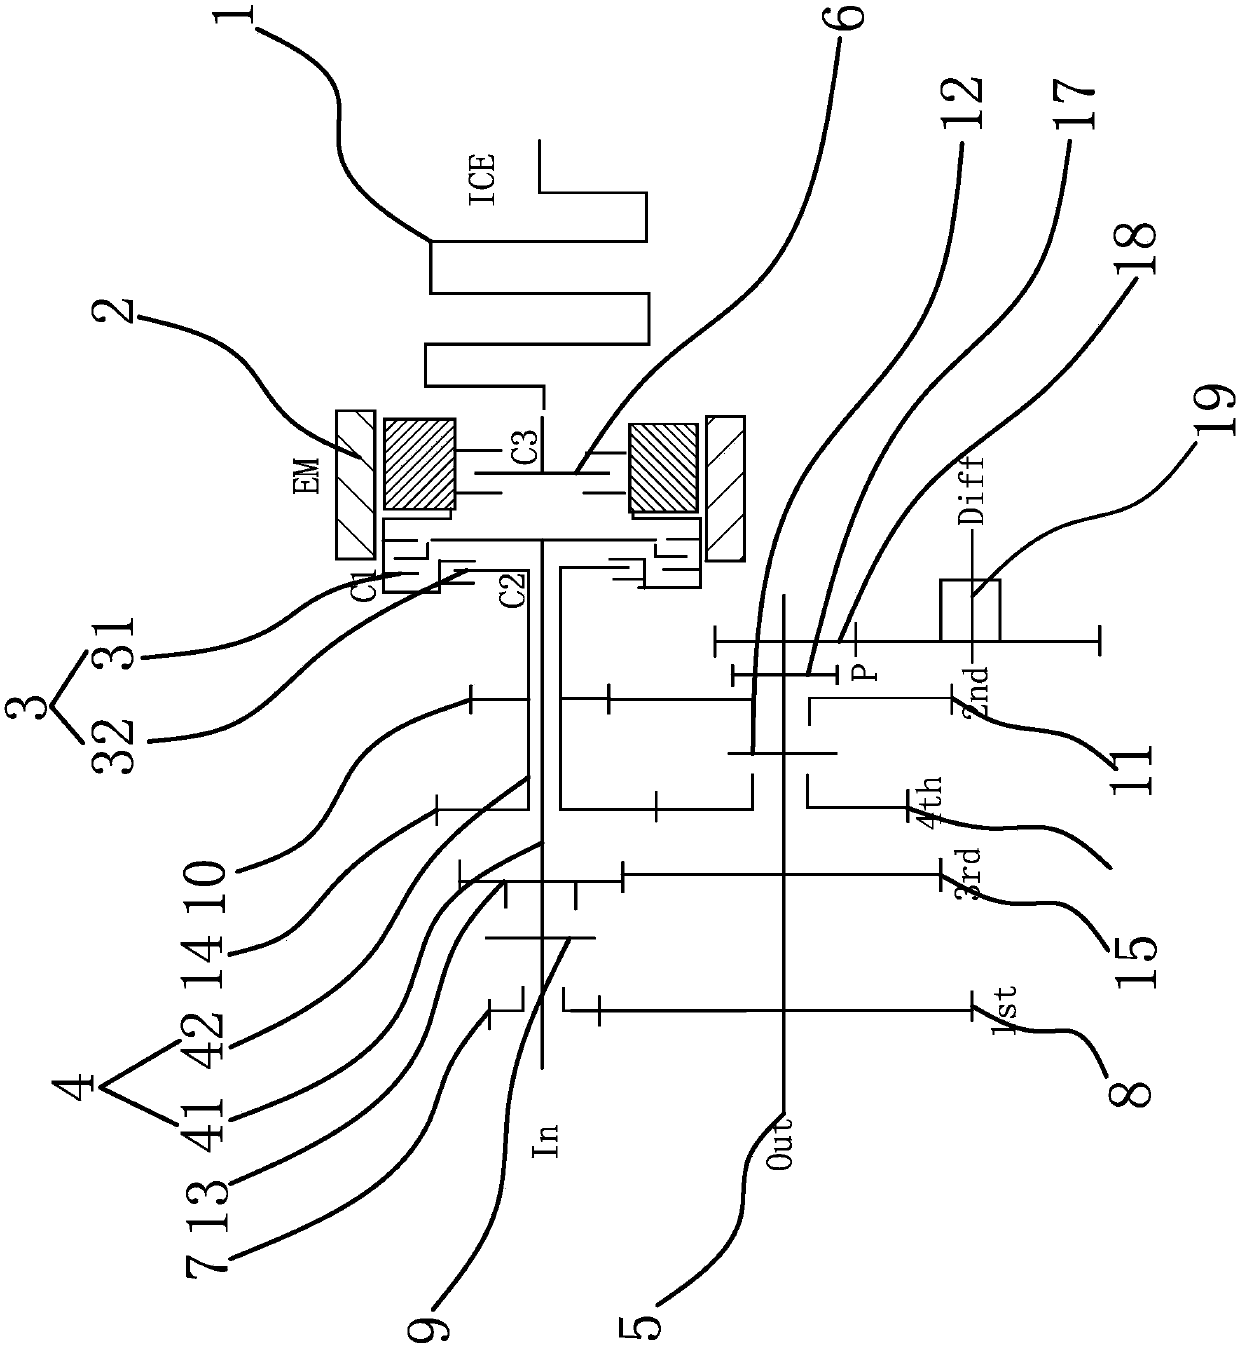 Transmission system of gearbox of hybrid electric vehicle